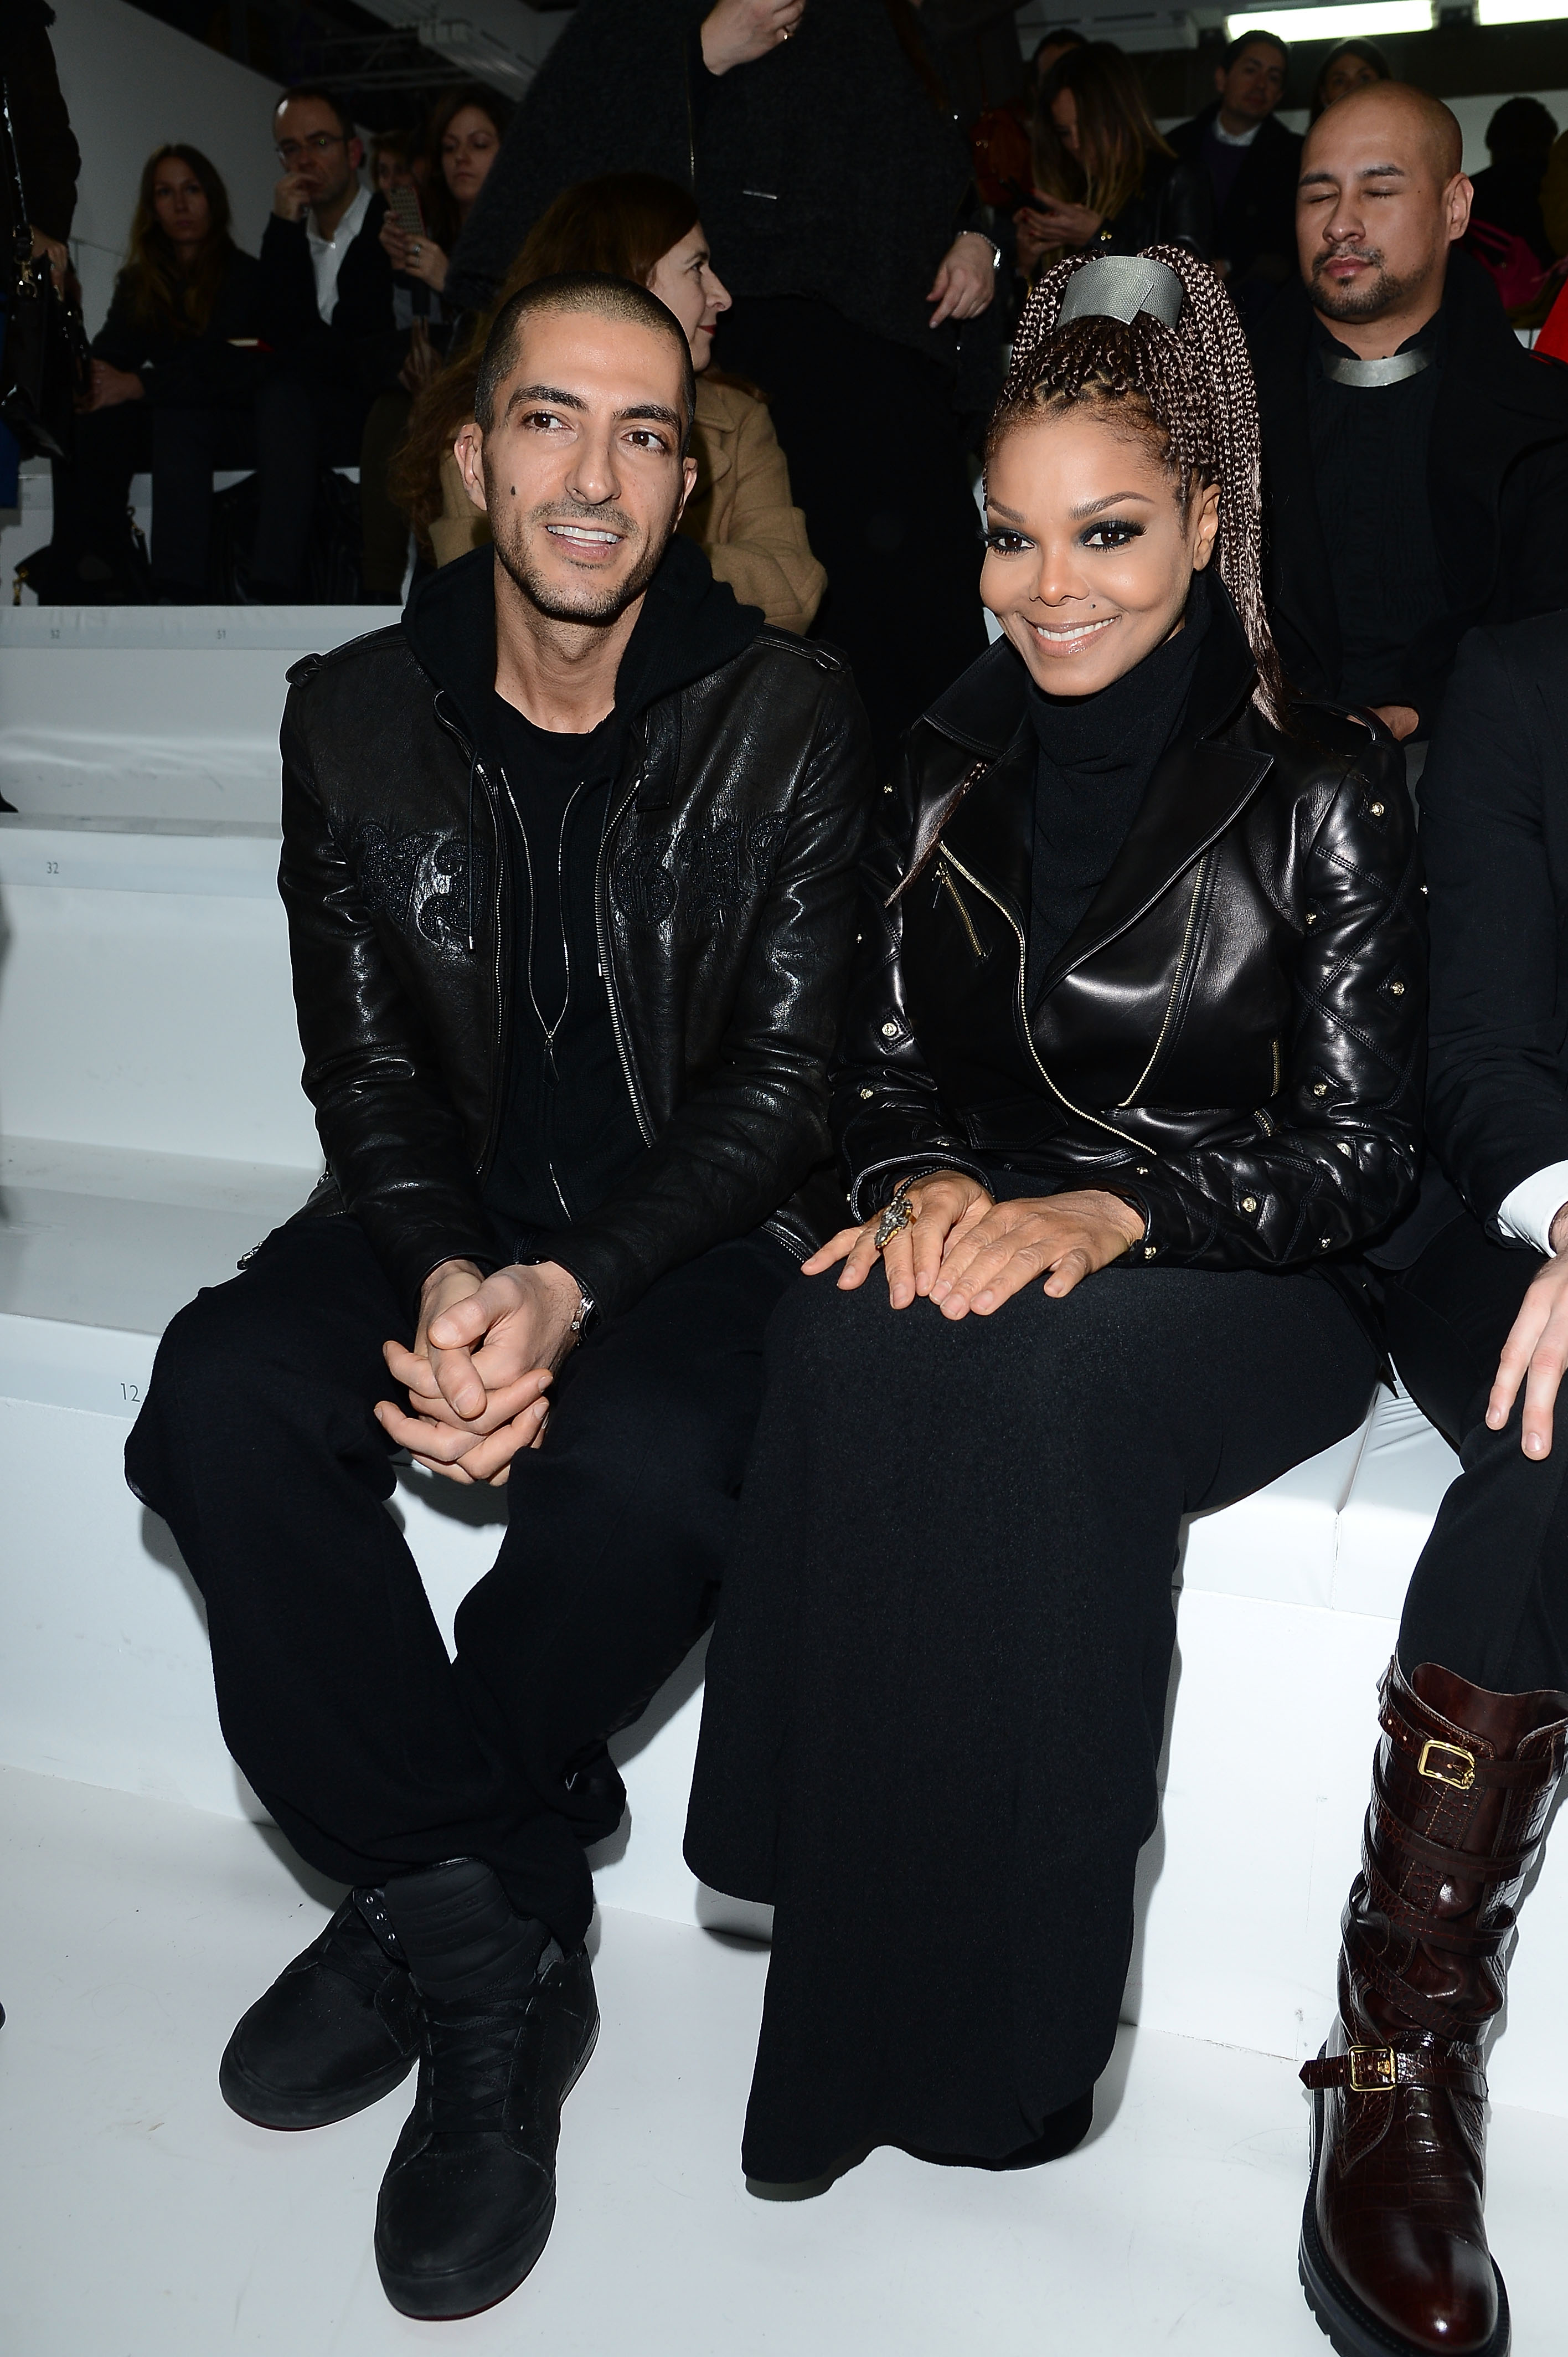 Wissam Al Mana and Janet Jackson attend the Versace fashion show in Milan, Italy, on February 22, 2013. | Source: Getty Images